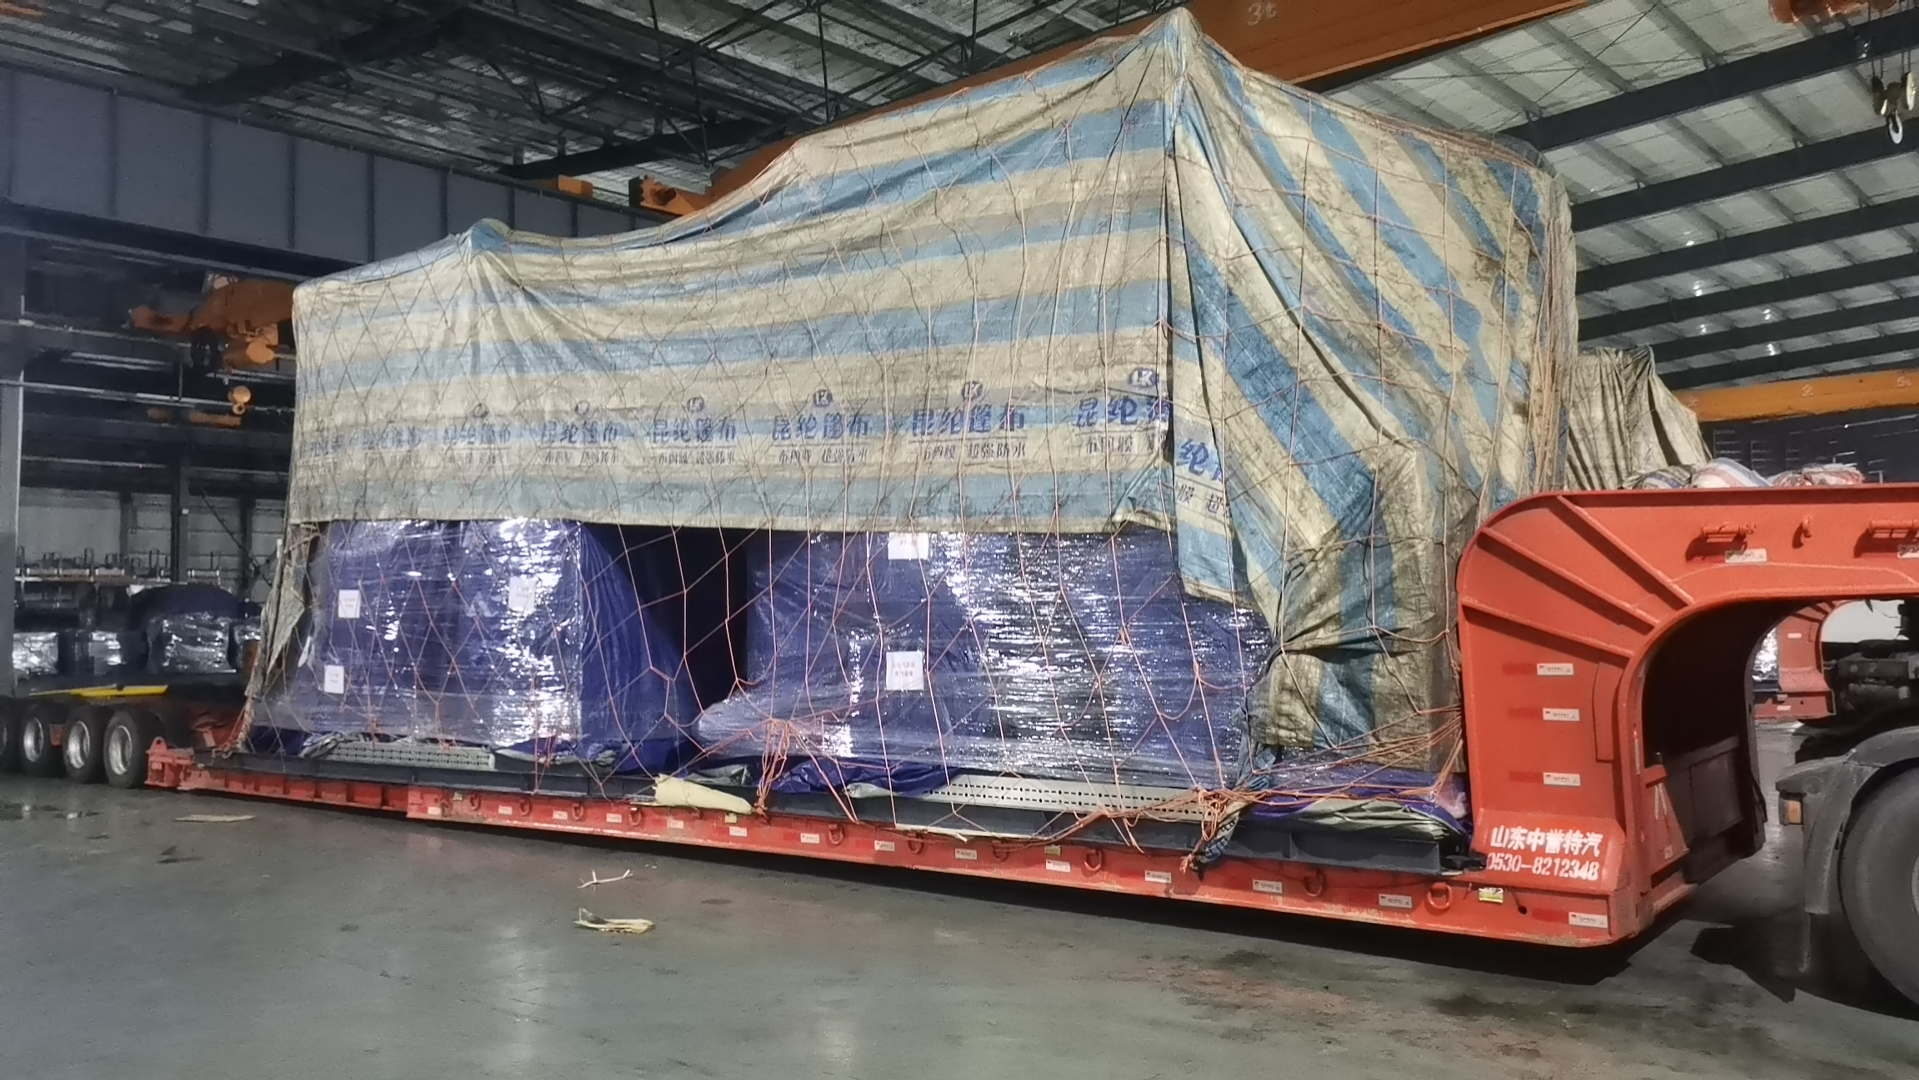 SAIFUAIR dryer was loaded and sent to the project site